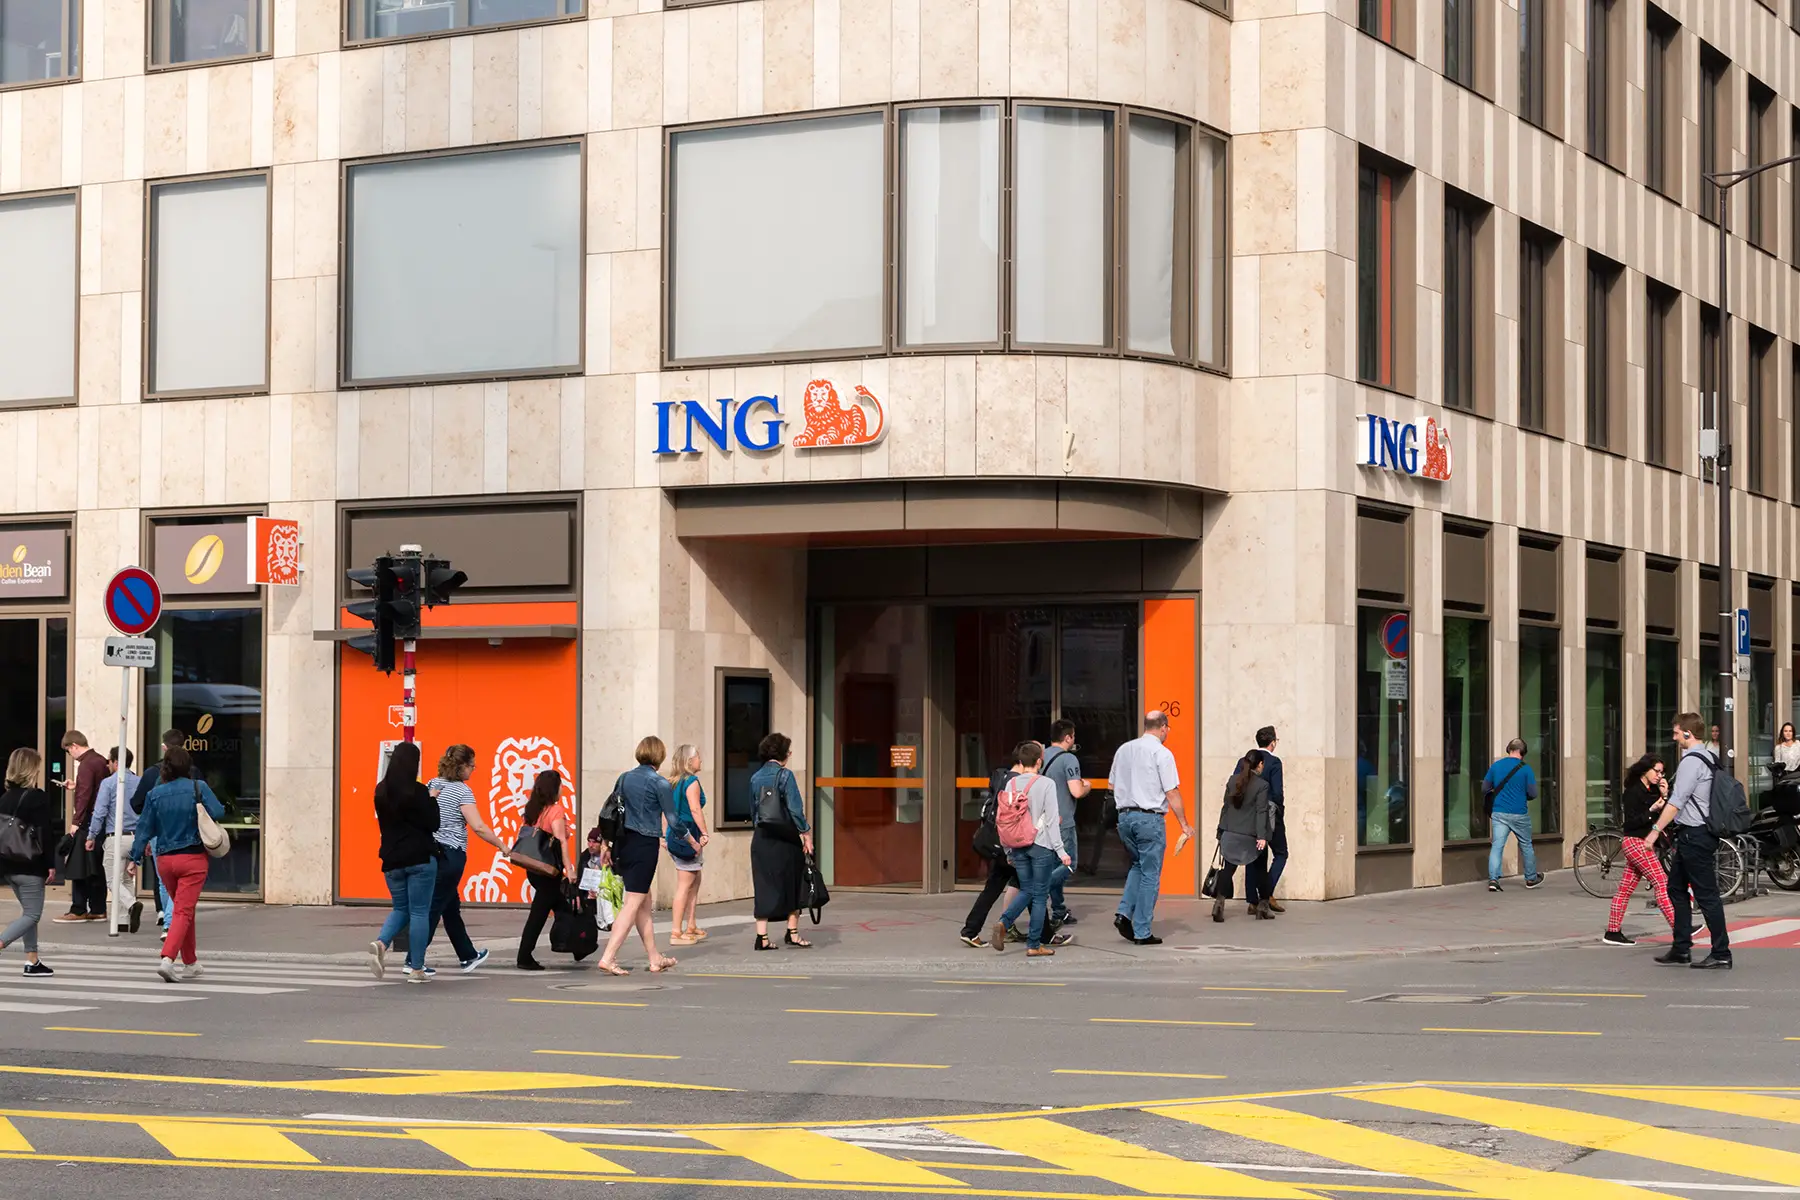 Entrance to an ING branch in Luxembourg City